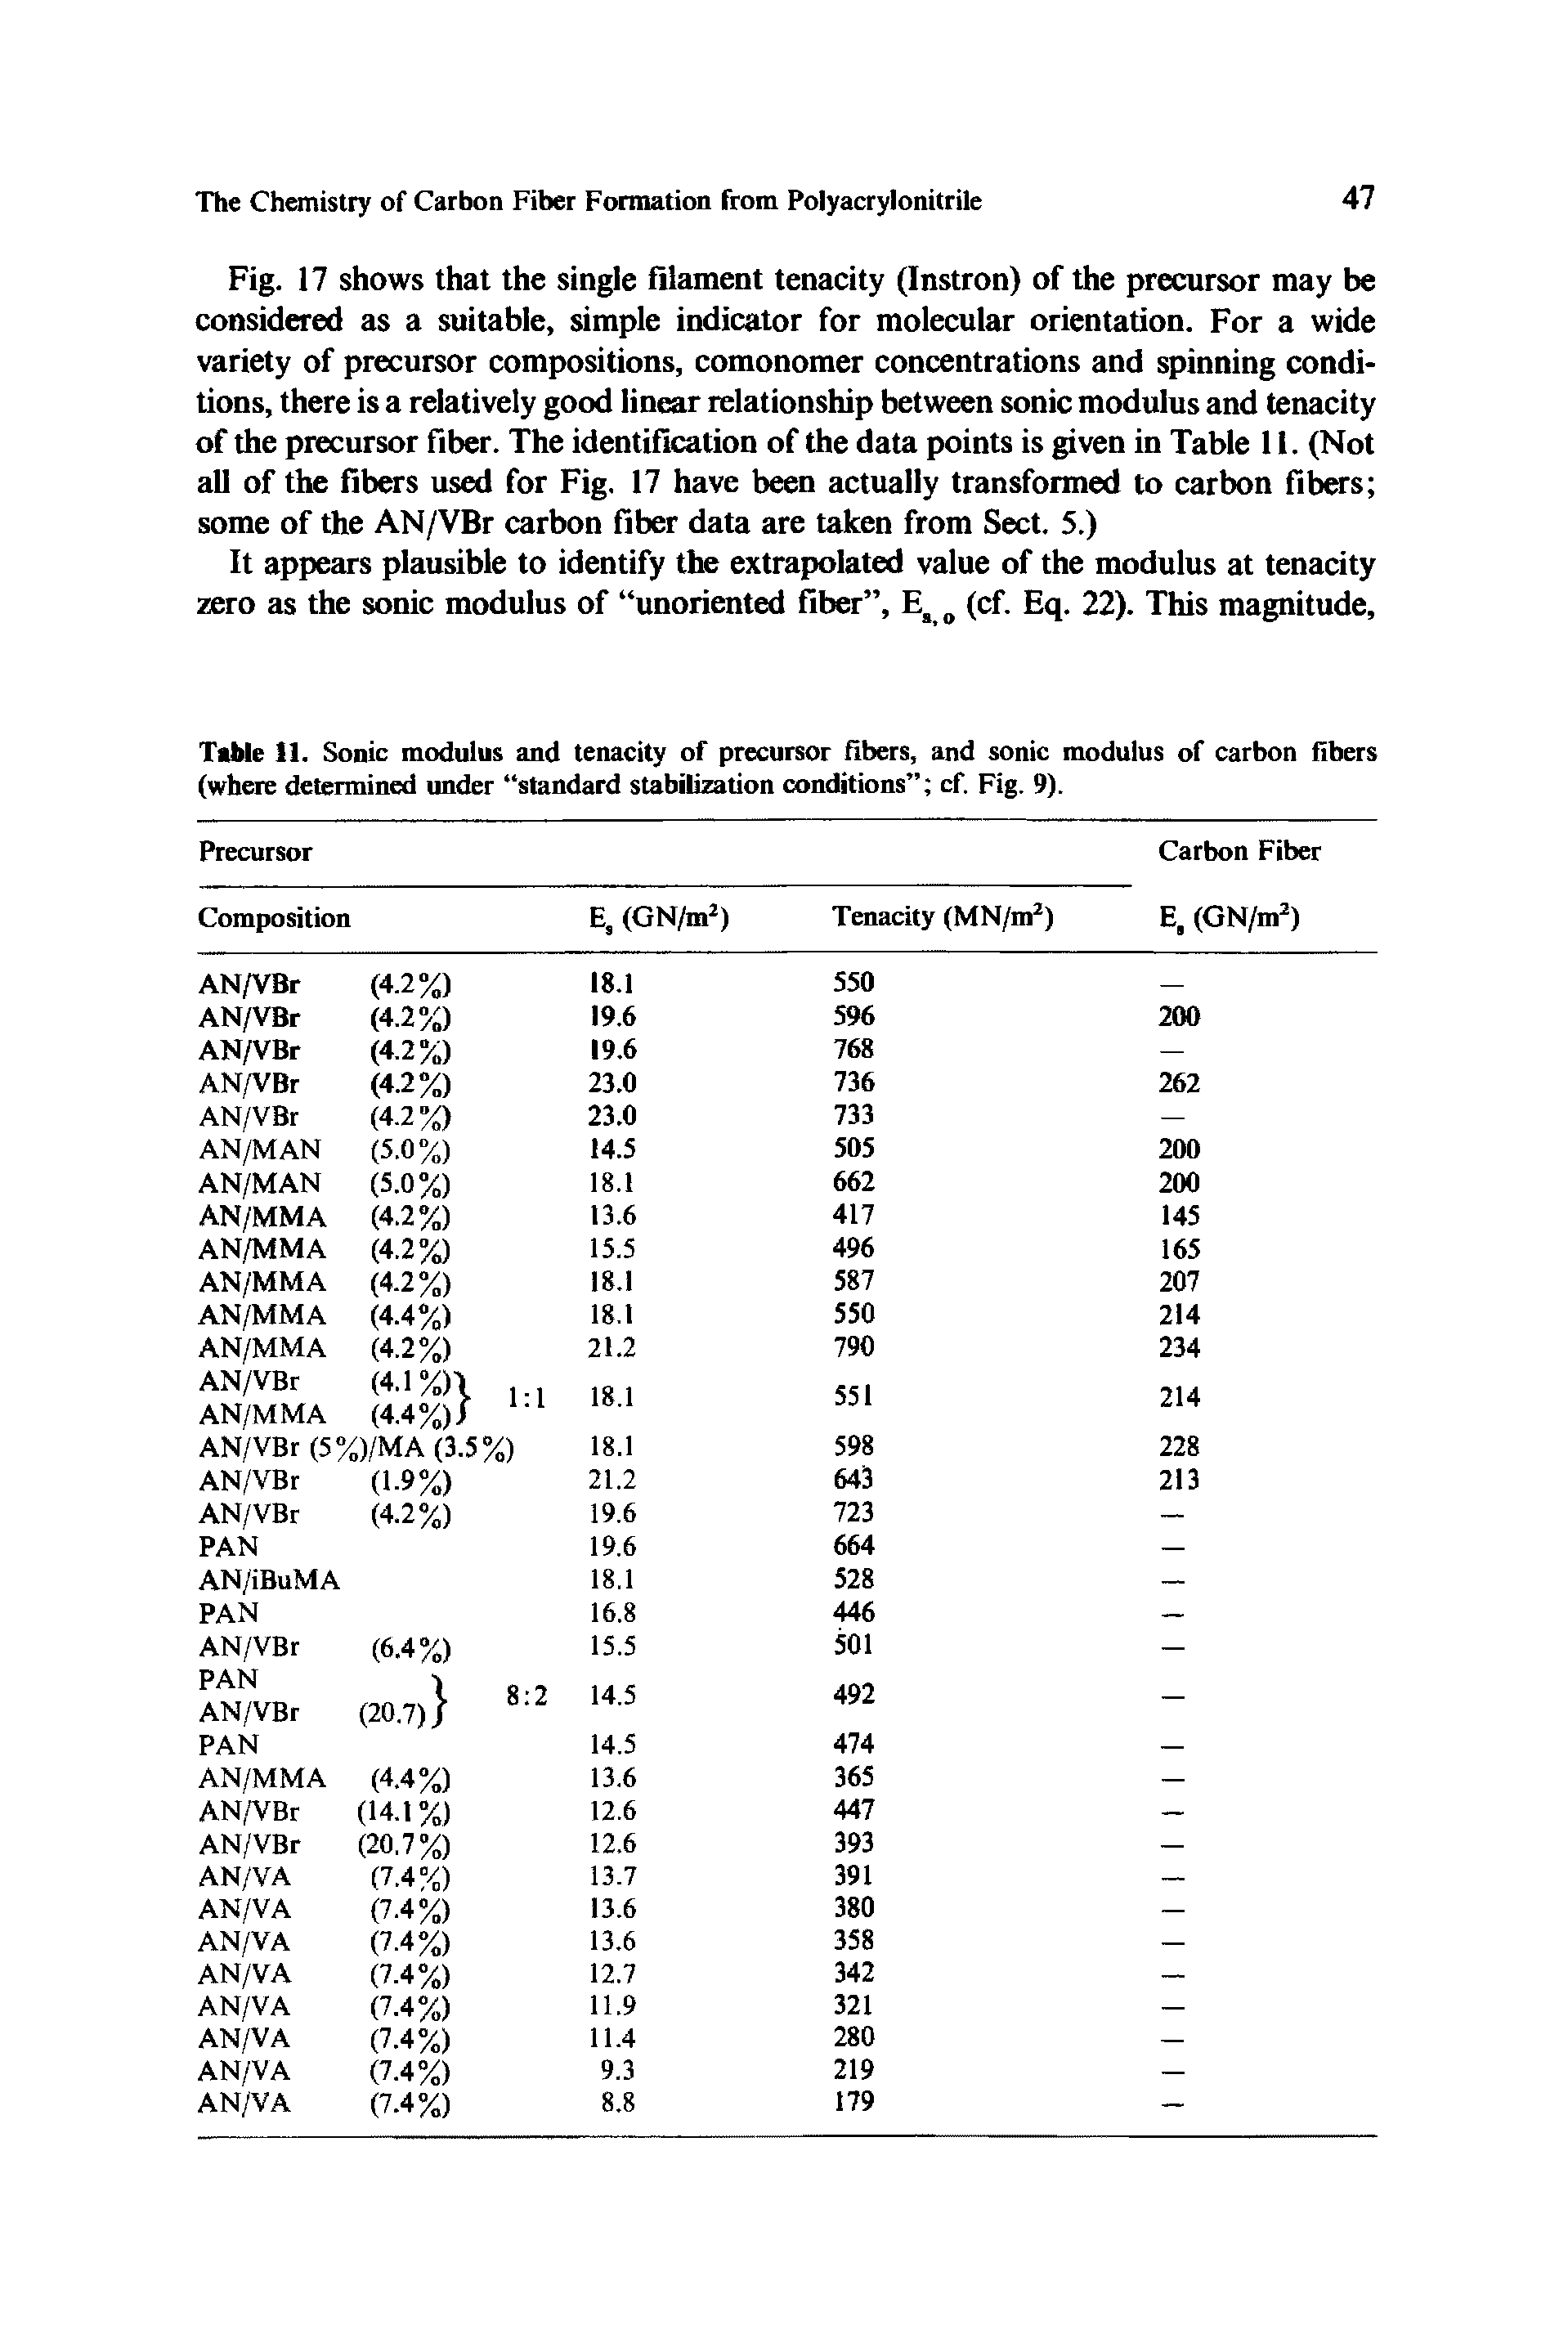 Table 11. Sonic modulus and tenacity of precursor fibers, and sonic modulus of carbon fibers (where determined under standard stabilization conditions cf. Fig. 9).